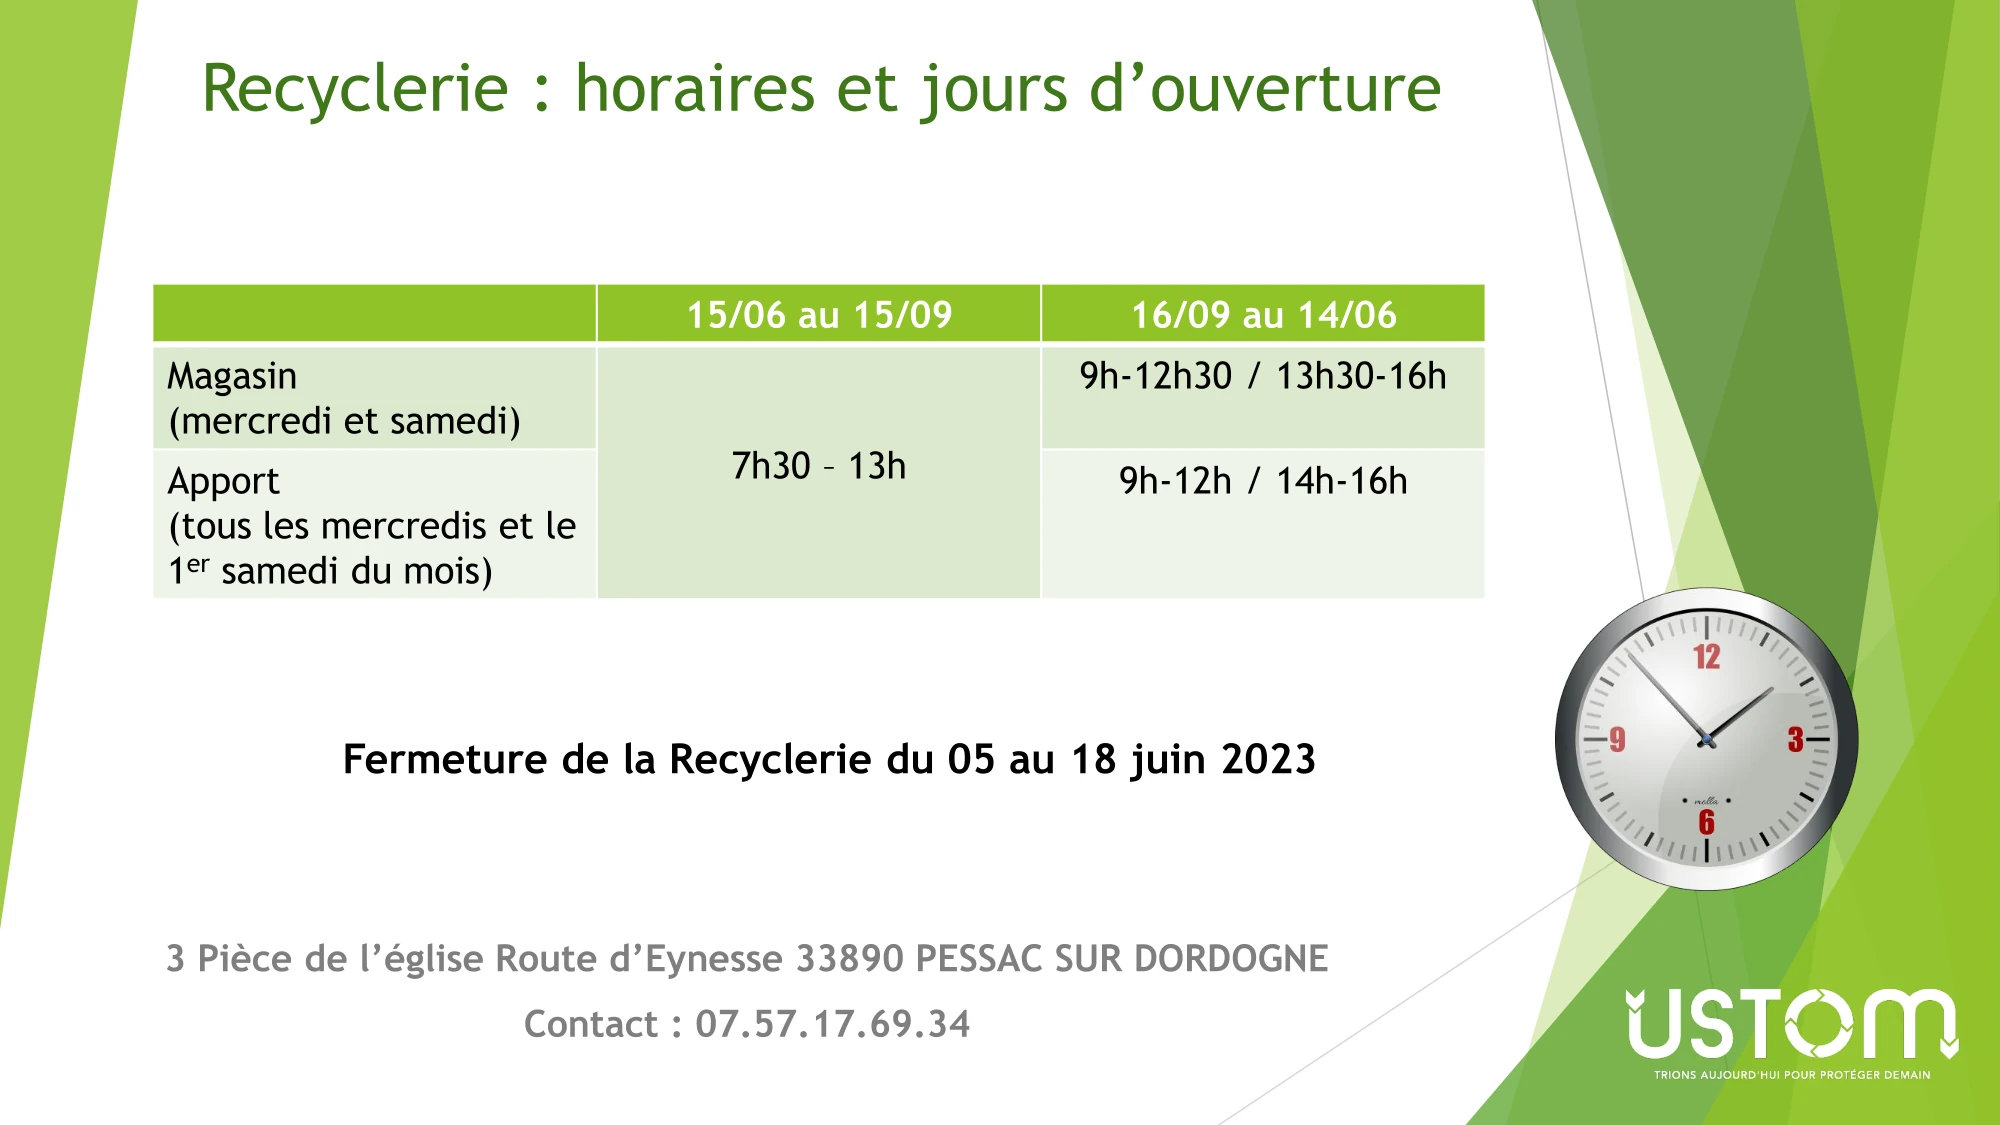 USTOM - Jours d'ouverture & Horaires Recyclerie